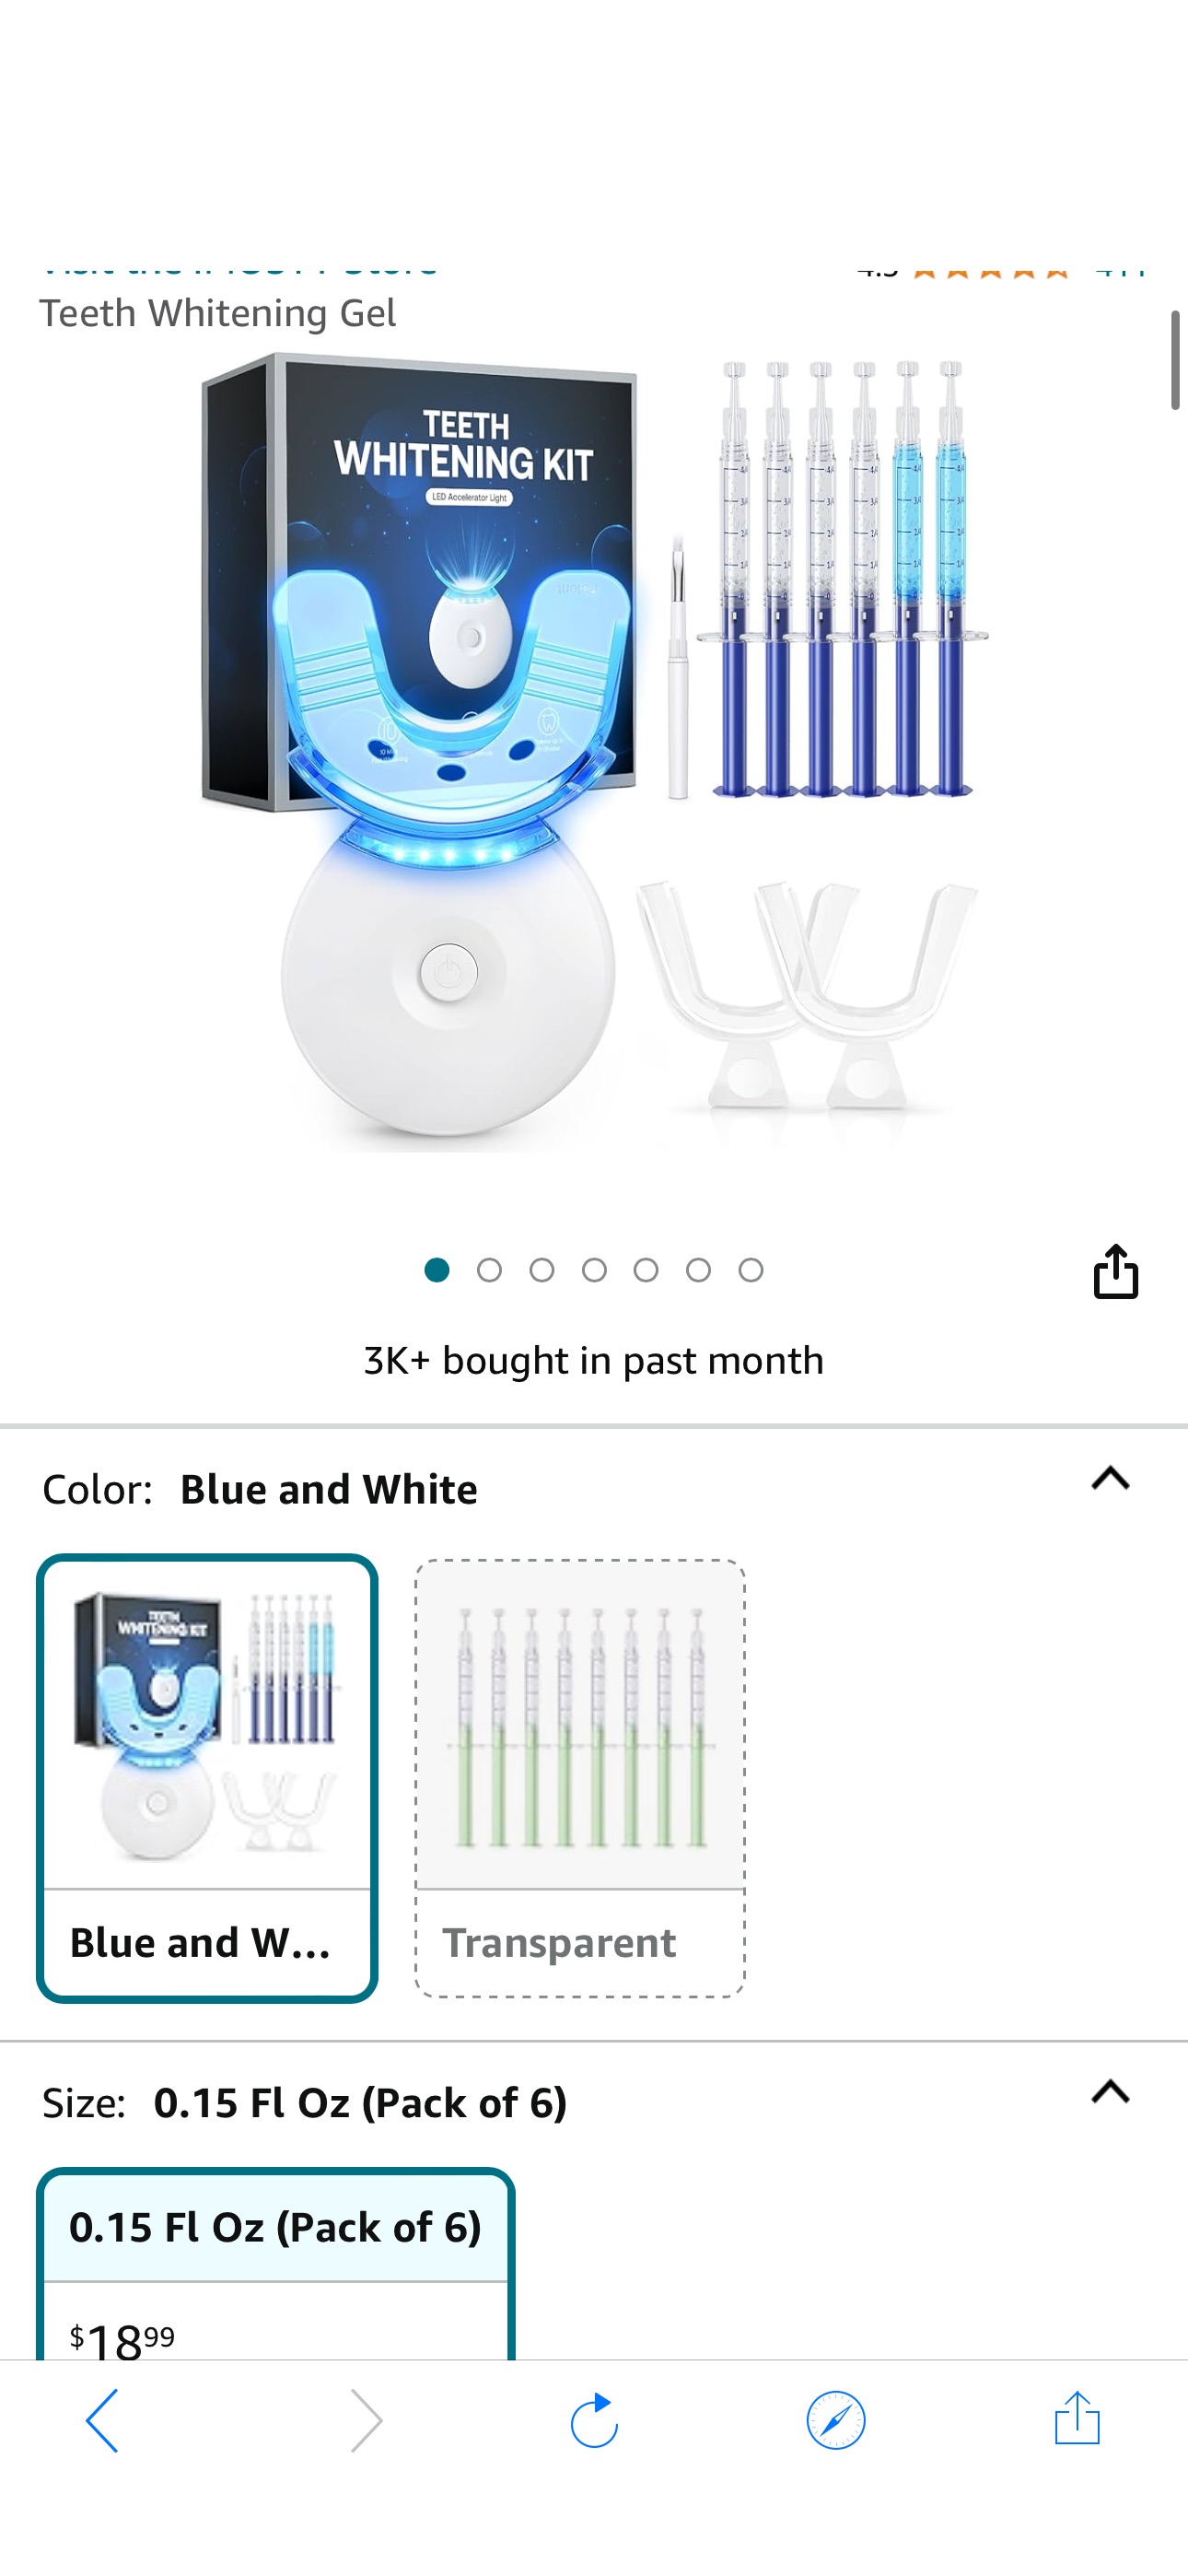 Amazon.com: Teeth Whitening Kit, LED Teeth Whitening Light with 6 X 3ml Carbamide Peroxide Teeth Whitening Gel, $8.xx Teeth Whitening Kit

Add lightning deal and use code 6RM6FD3C